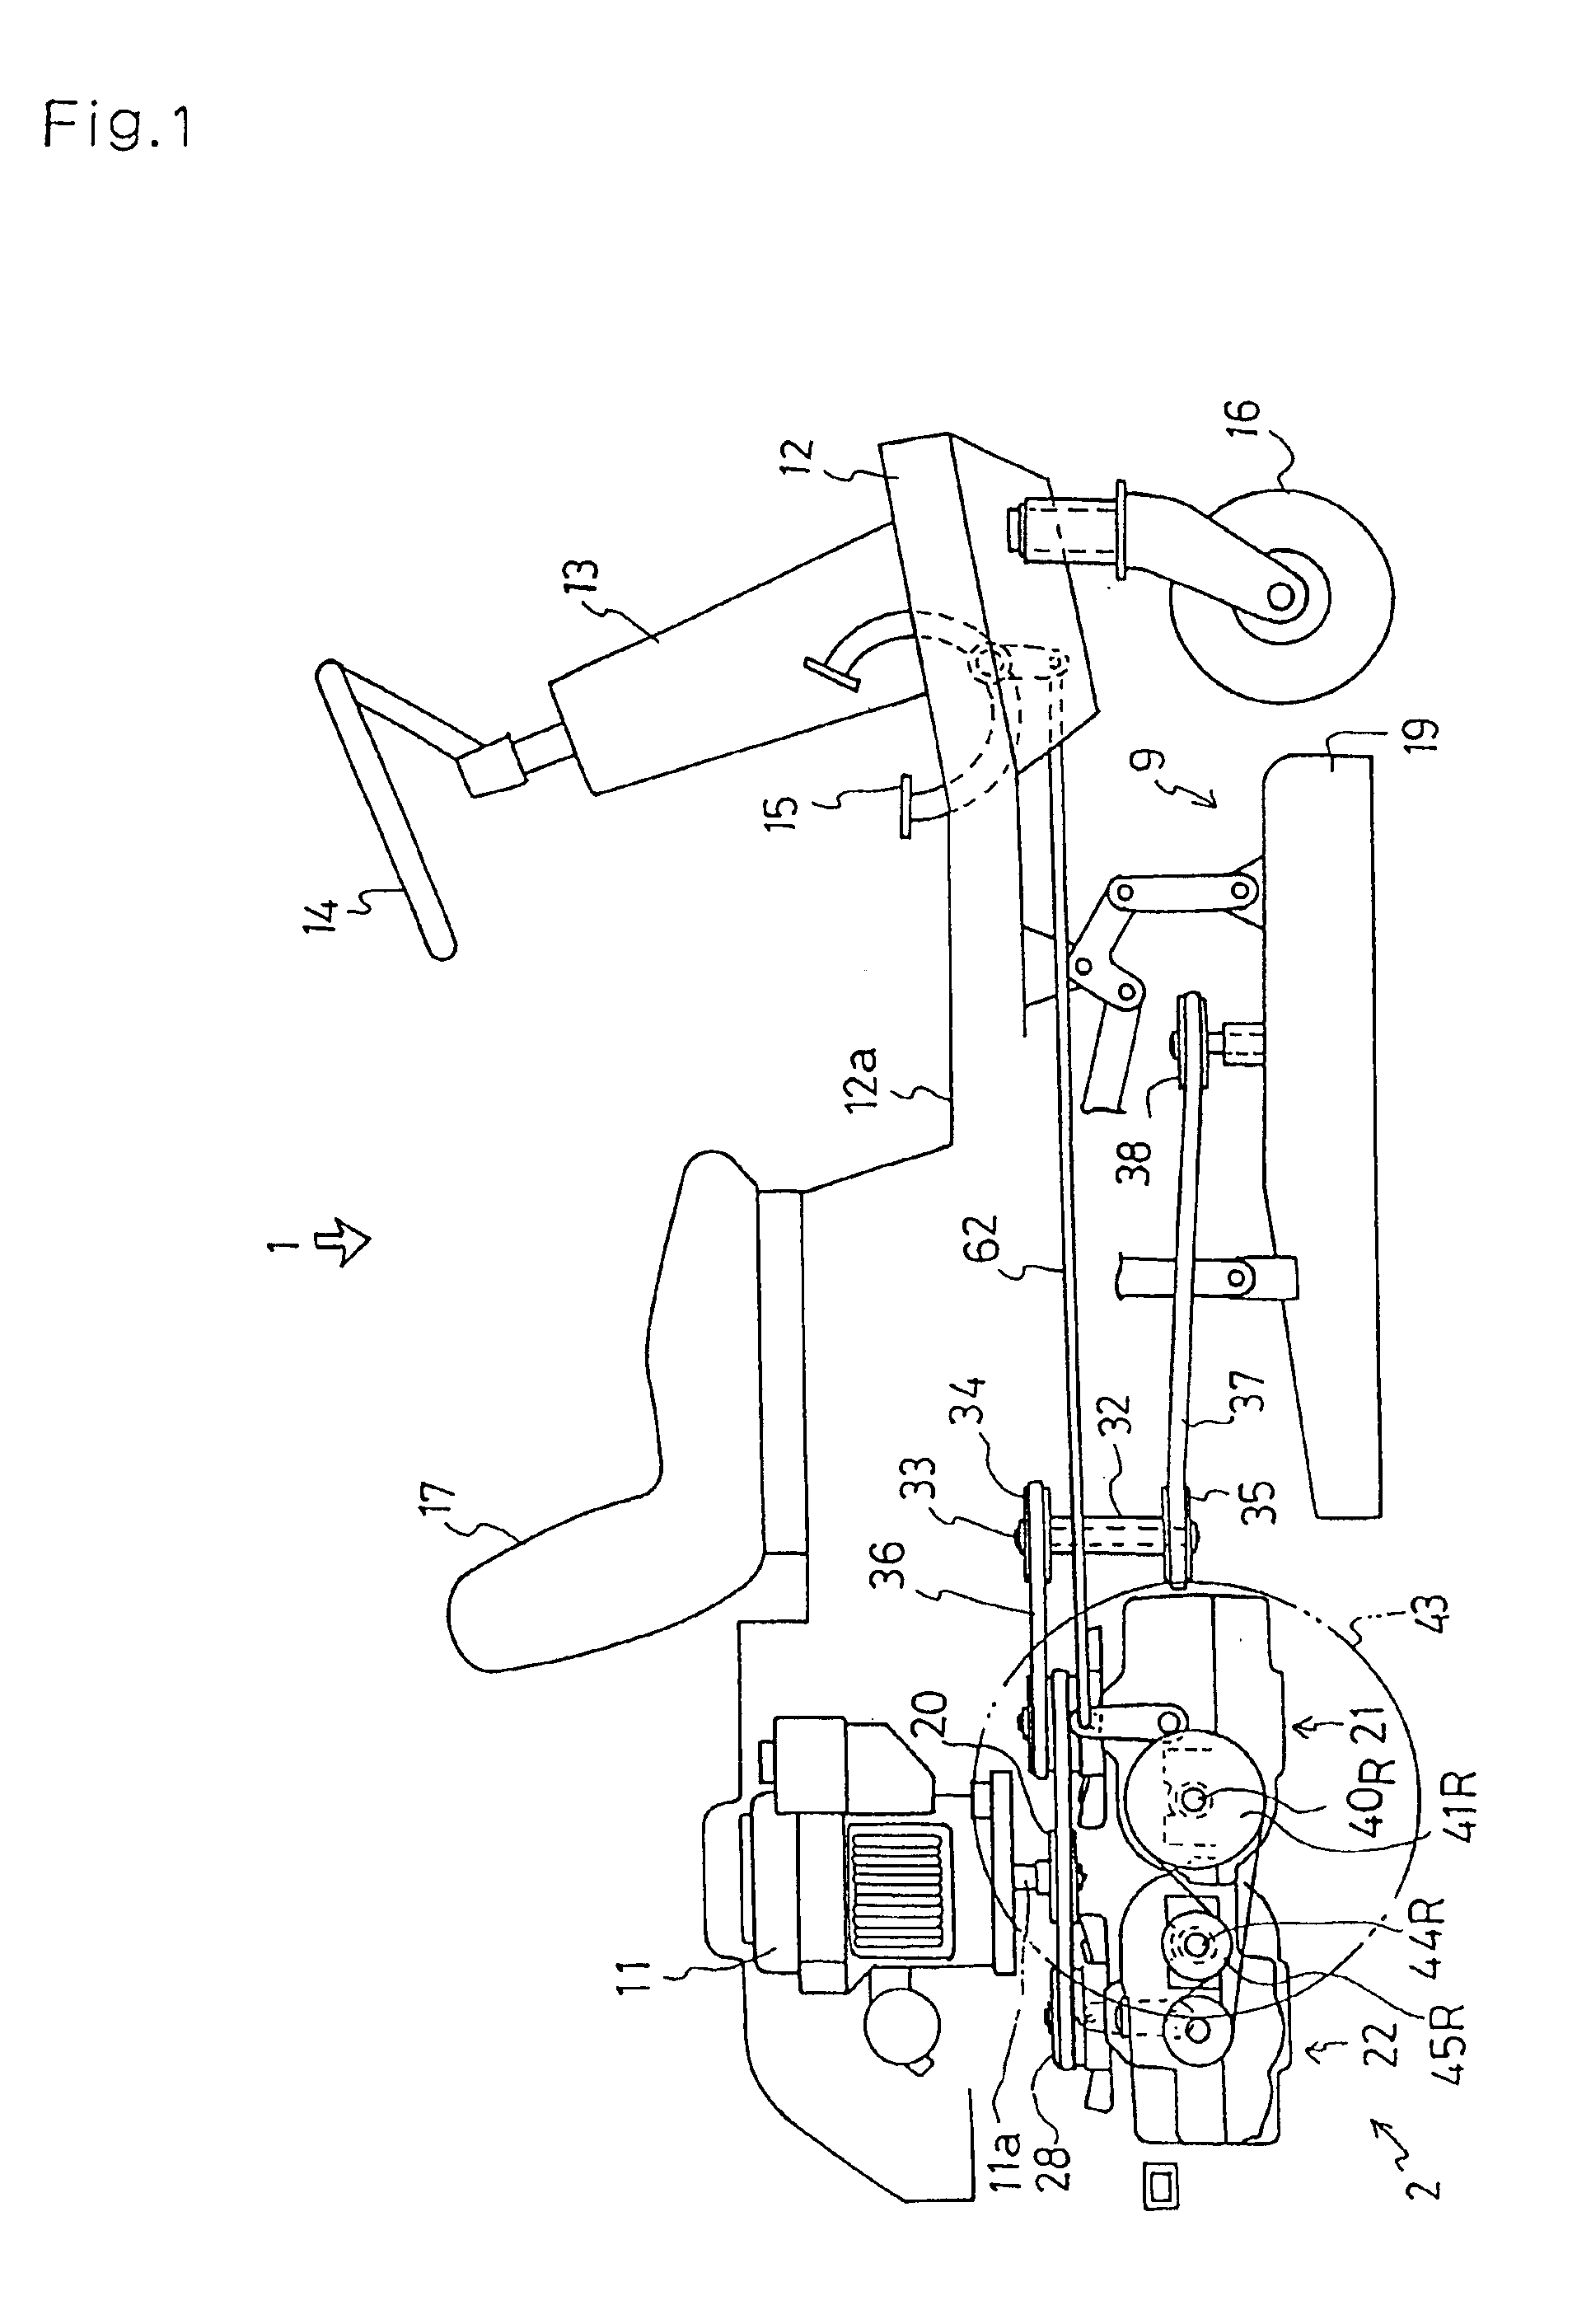 Driving apparatus for speed changing and steering of a vehicle